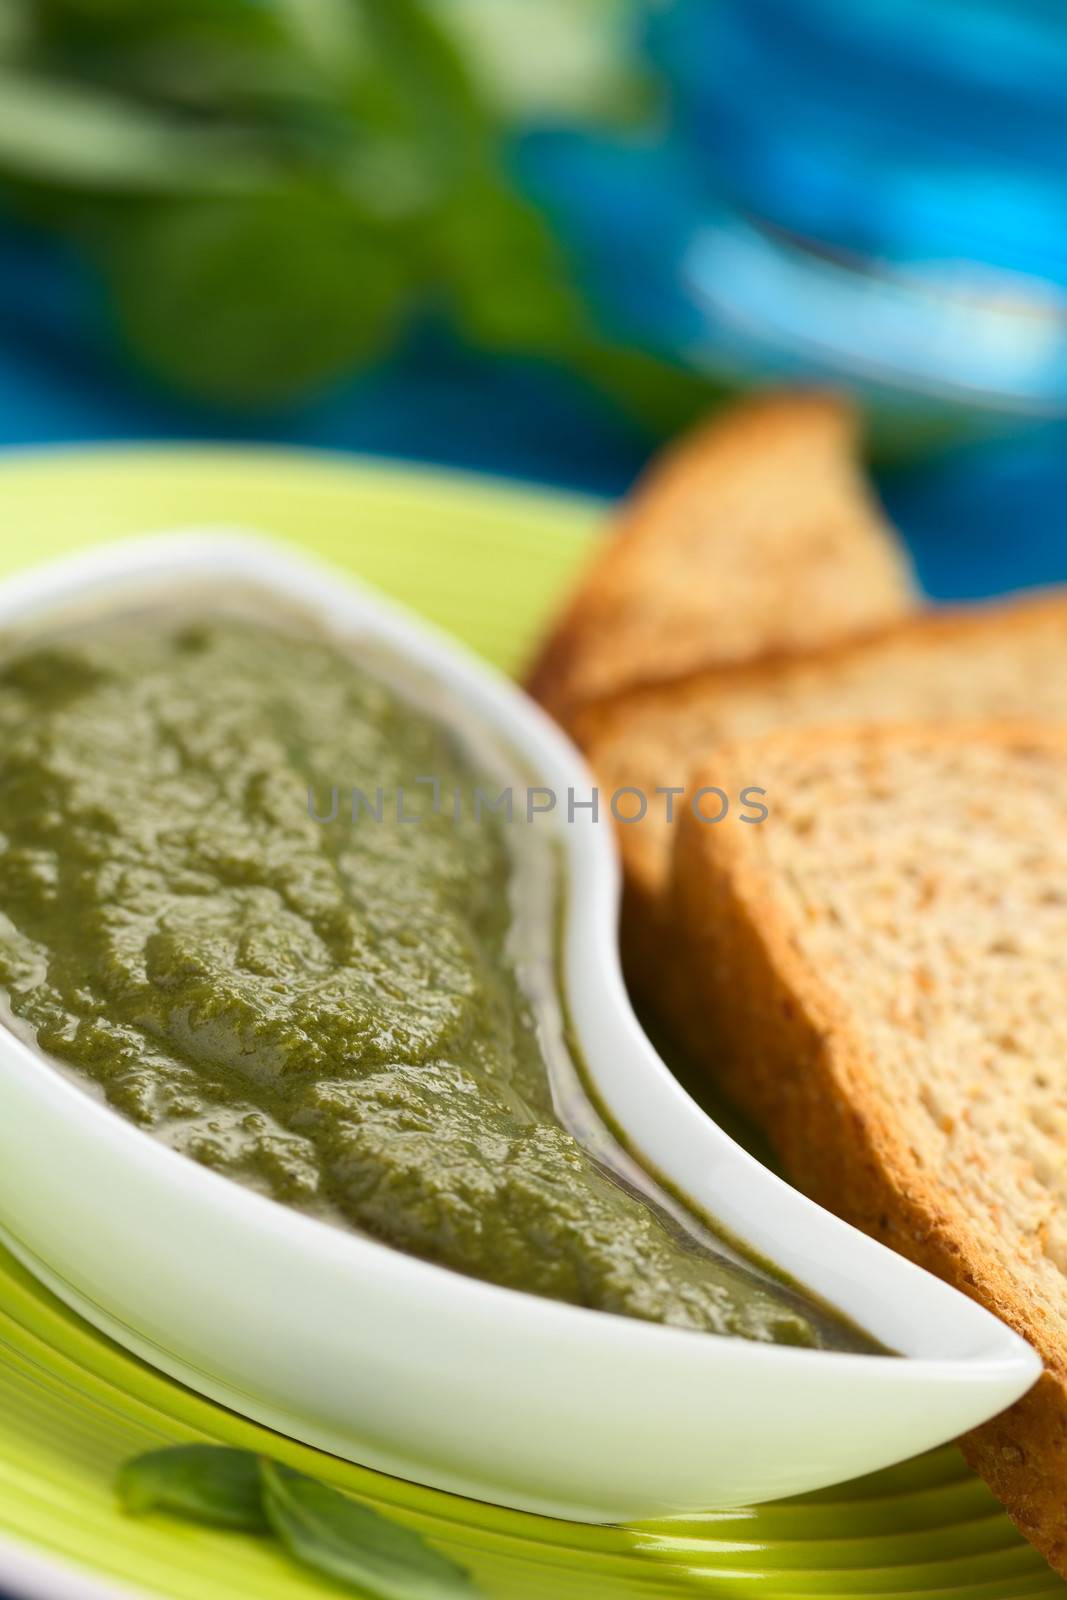 Fresh pesto made of basil and spinach in a small bowl with toasted wholegrain bread on the side (Selective Focus, Focus one third into the pesto)  